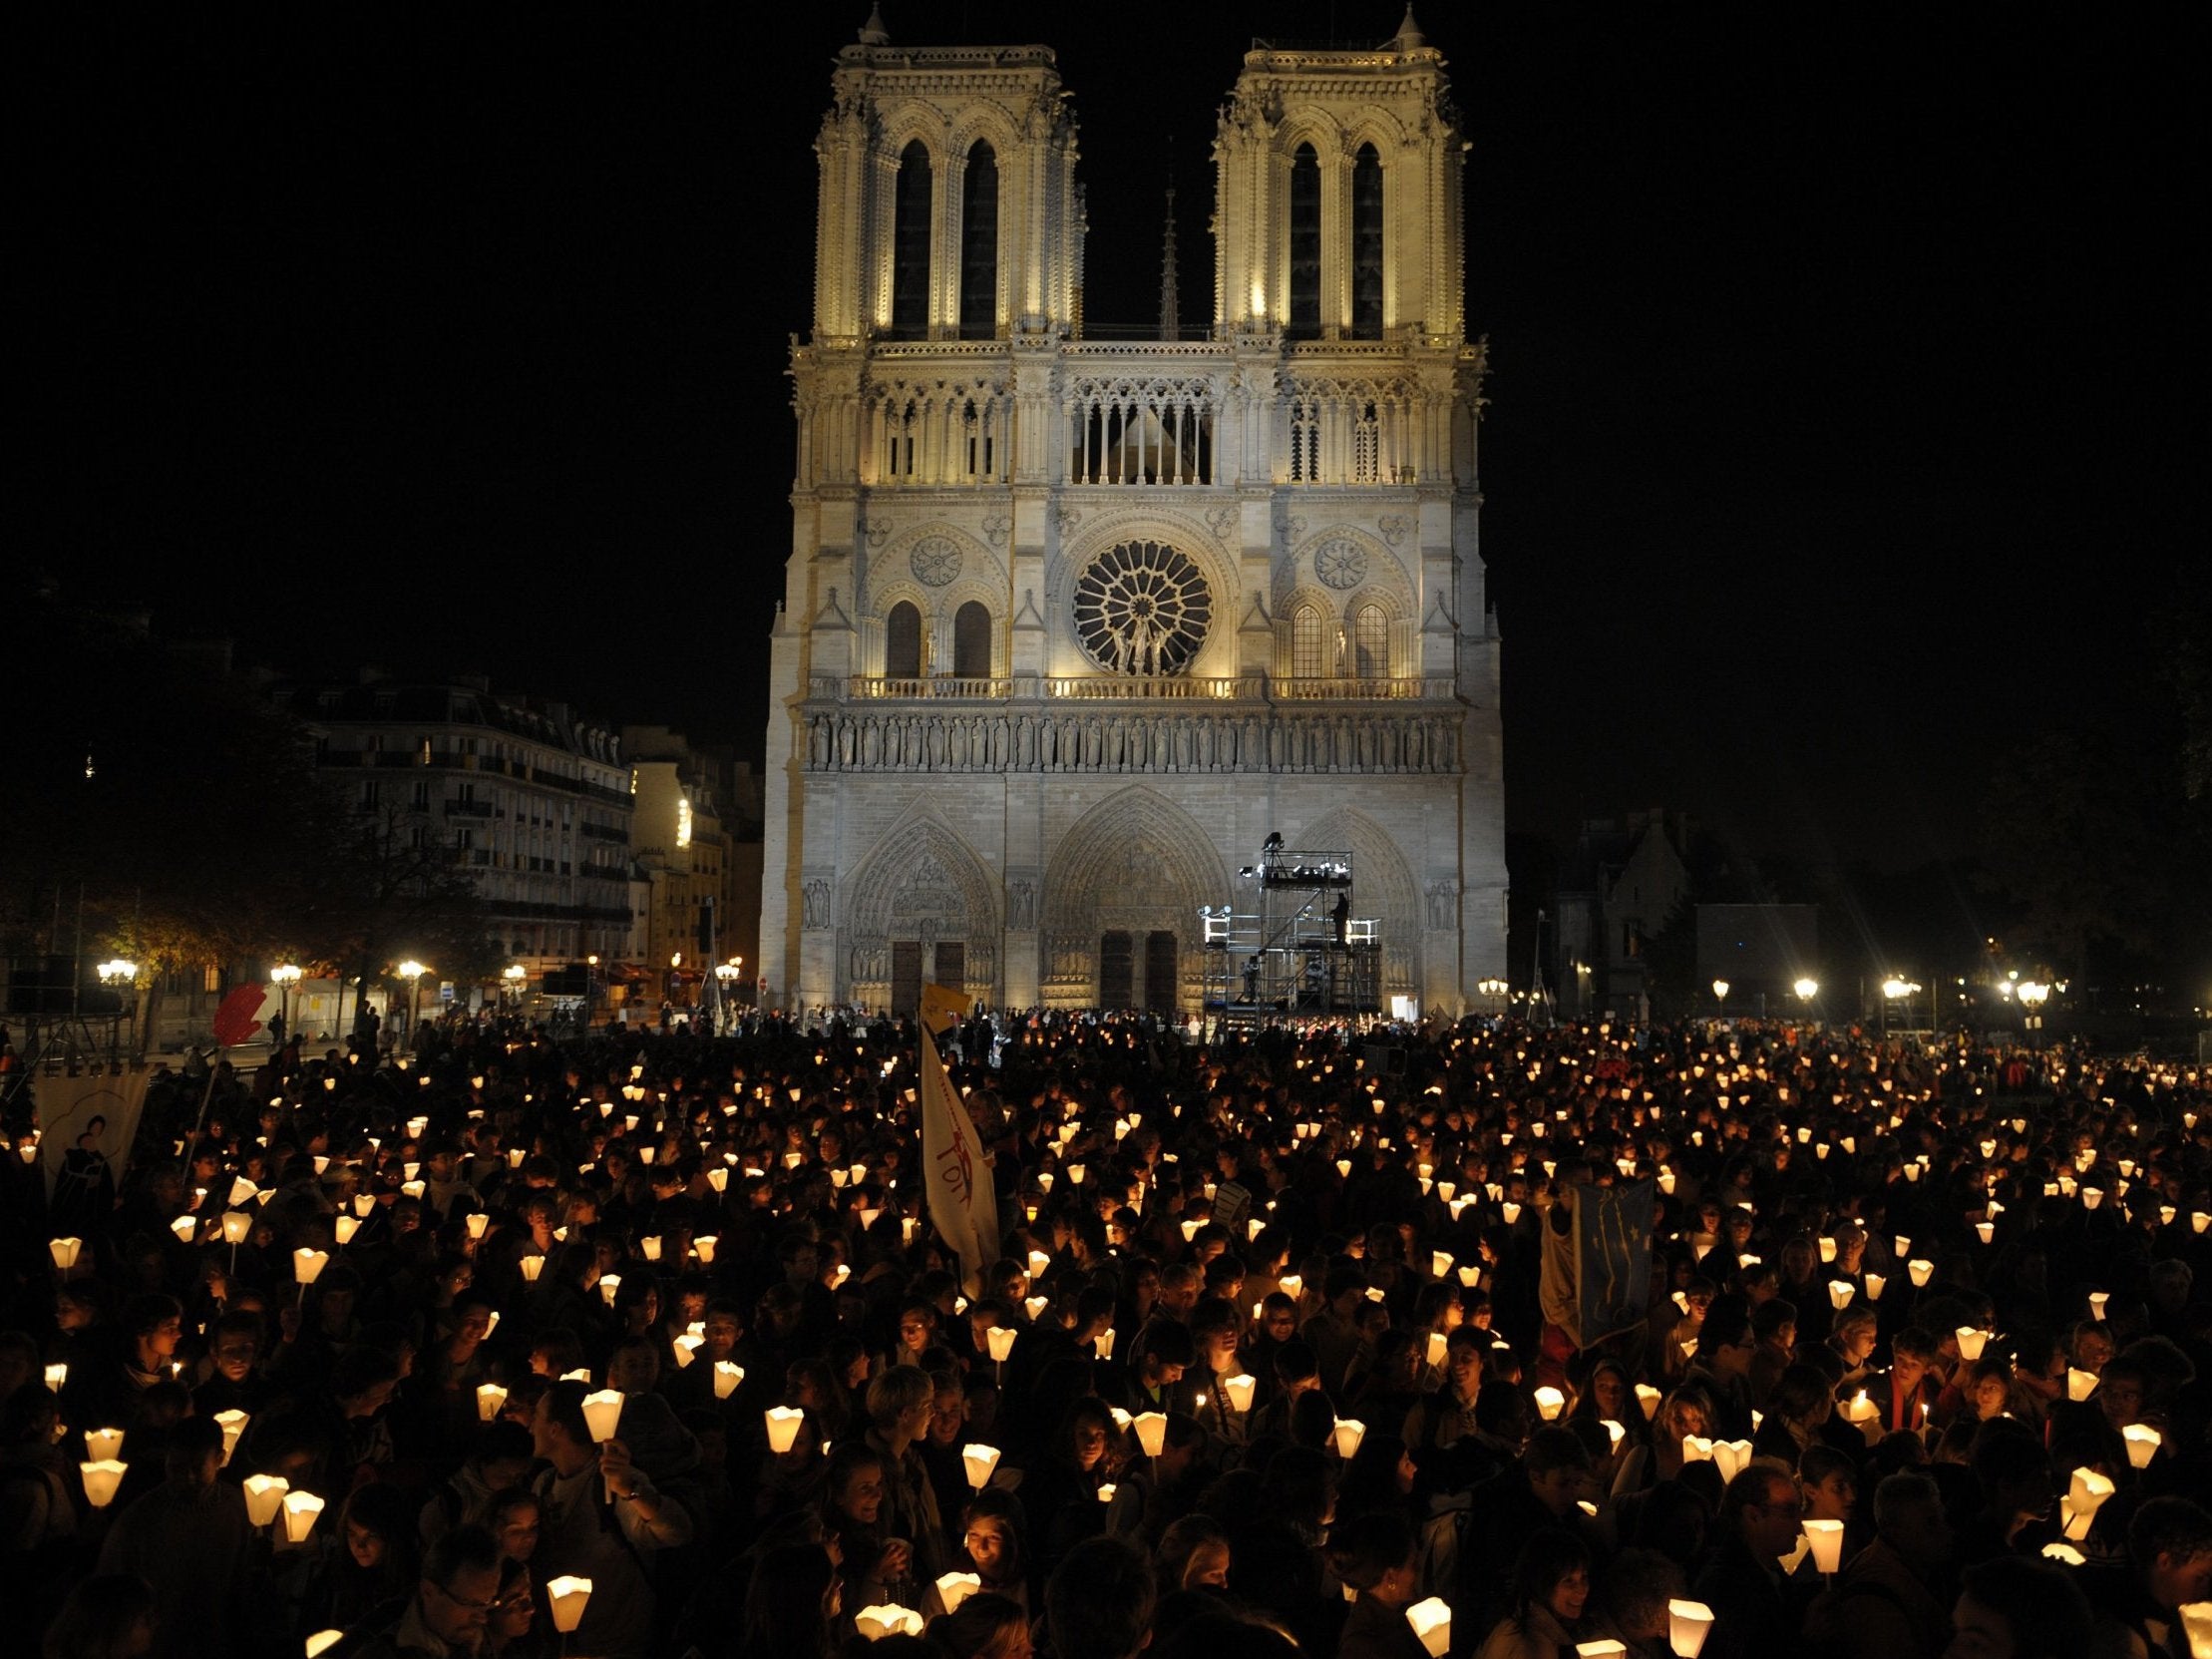 Faithful hold candles during a "Path of light" procession between Notre Dame Cathedral during the four-day visit in France of Pope Benedict XVI in 2008